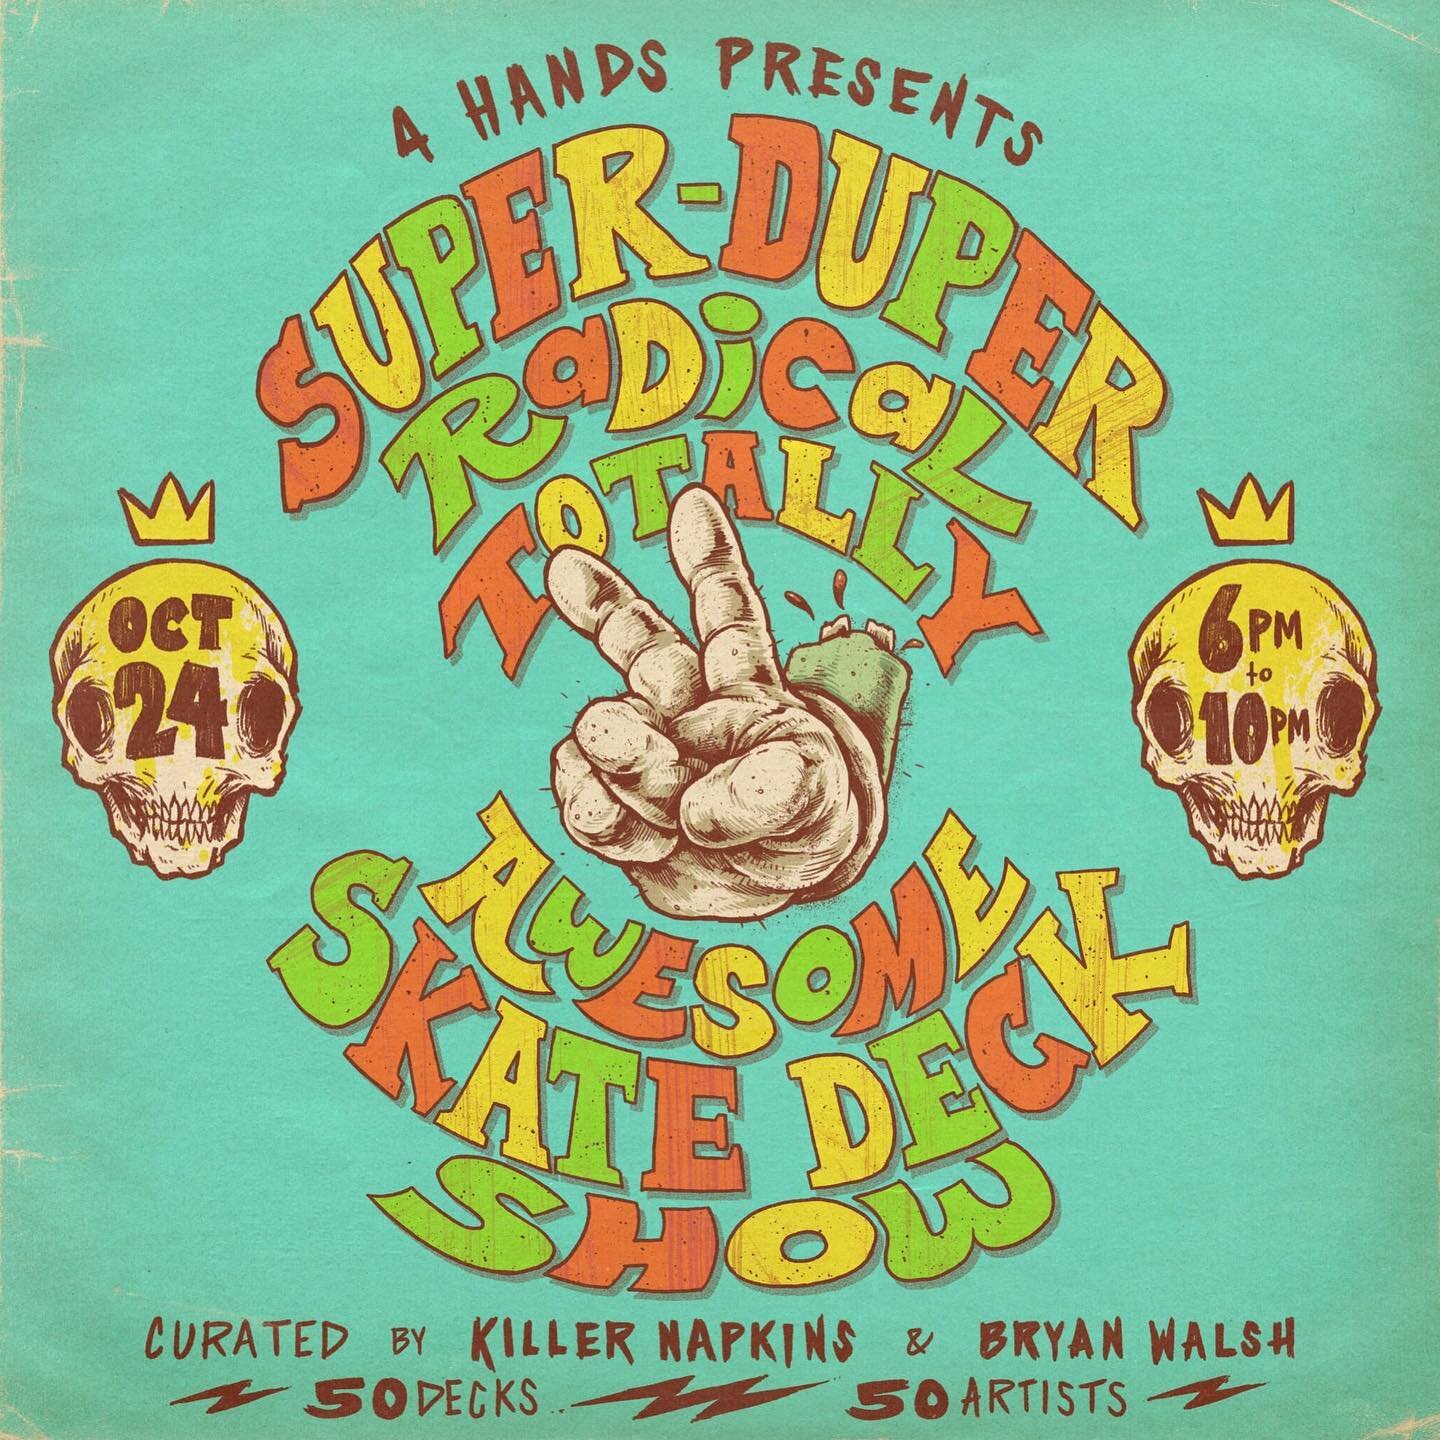 Excited to be part of this show for the second year! Can&rsquo;t wait to see all the decks! Thanks to @4handsbrewingco @killernapkins and @bryanwalshart for curating. #superduperradicaltotallyawesomeskatedeckshow2 #4handsbrewing #skatedeckshow #stlou